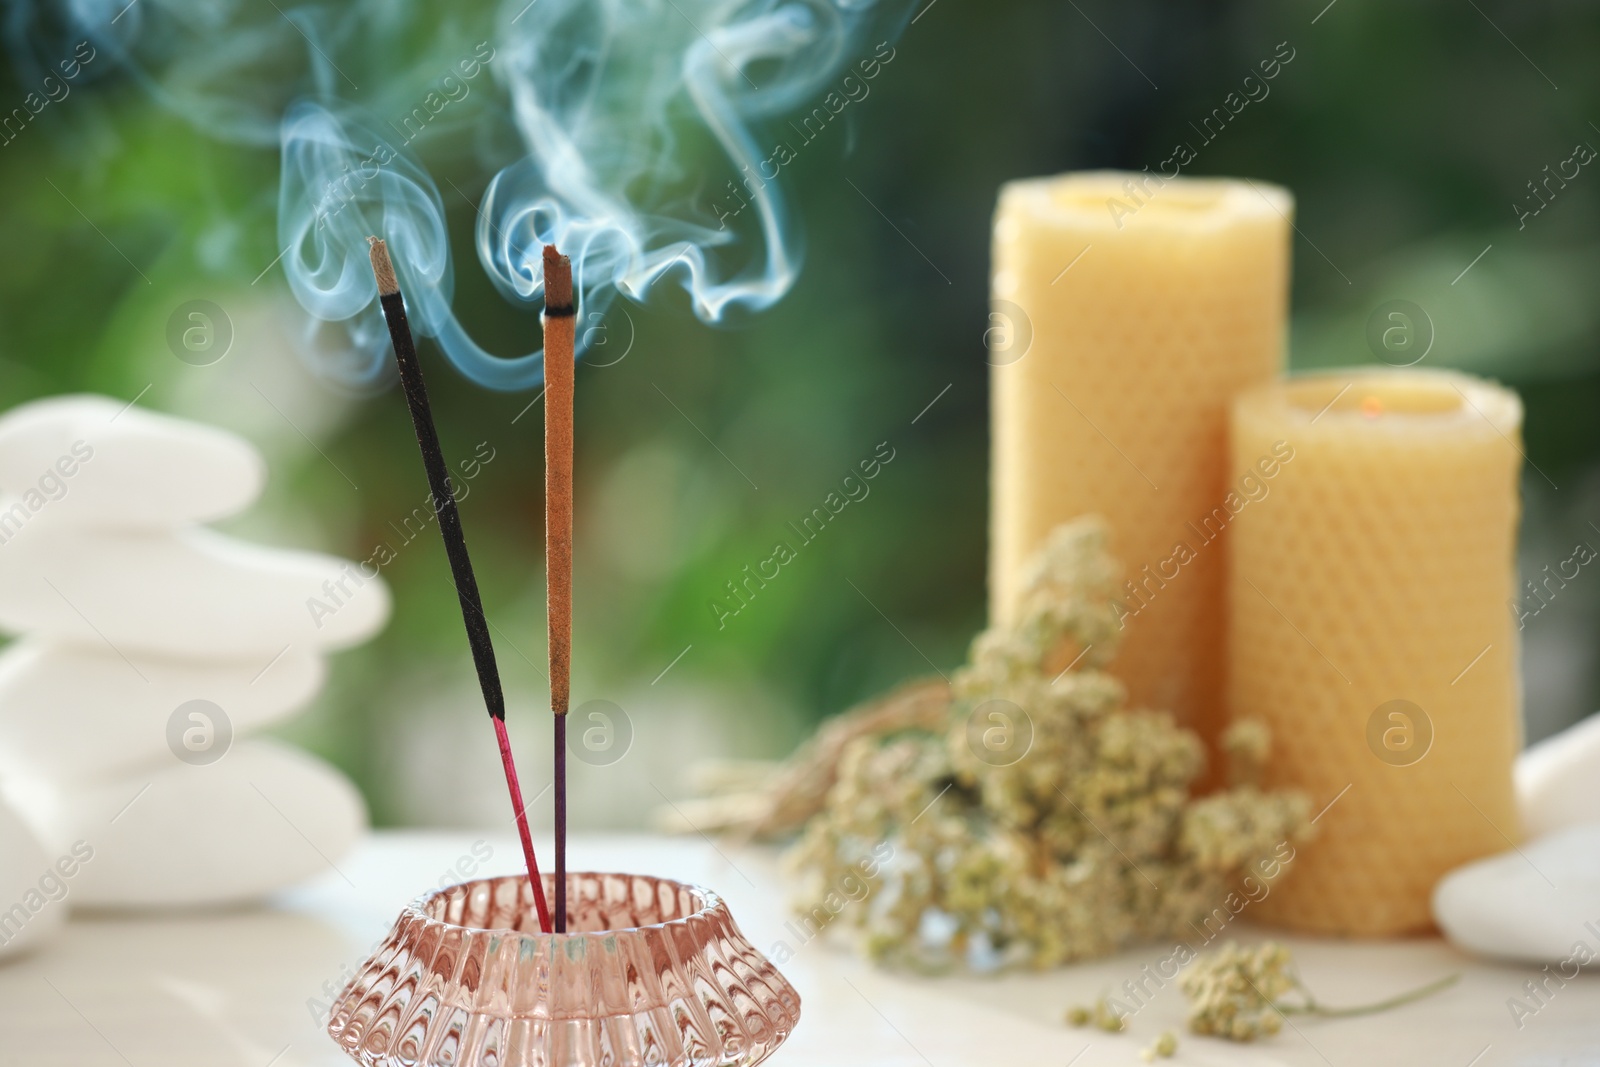 Photo of Incense sticks smoldering in holder near stones, candles and dry flowers on table outdoors